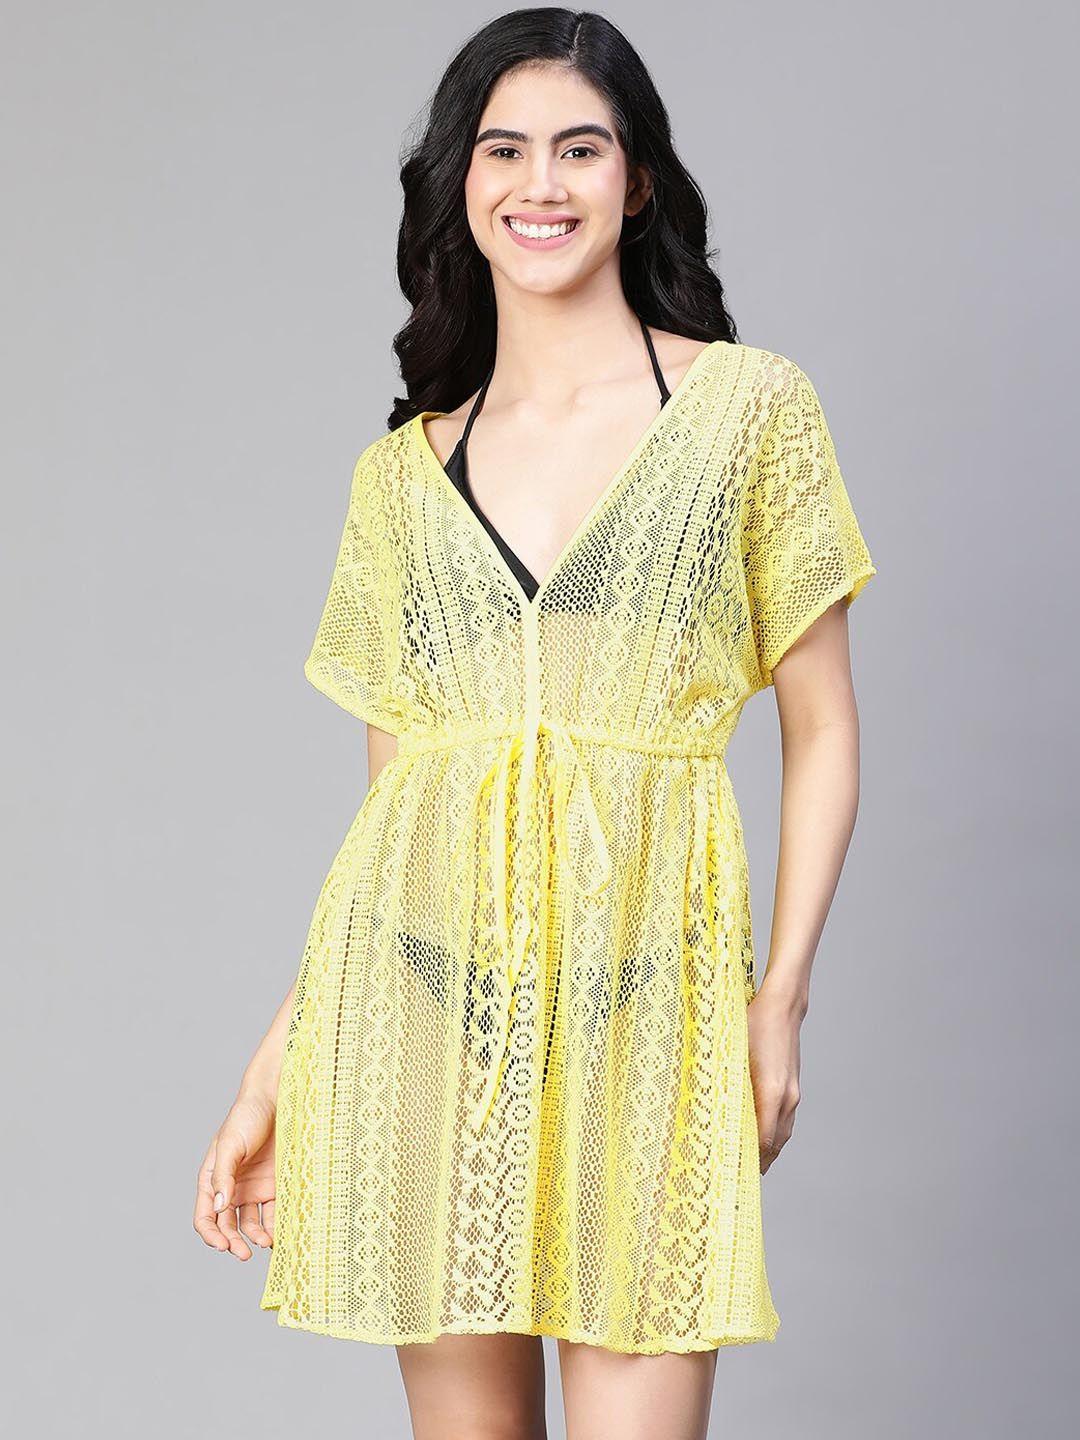 oxolloxo self design cotton cover-up dress